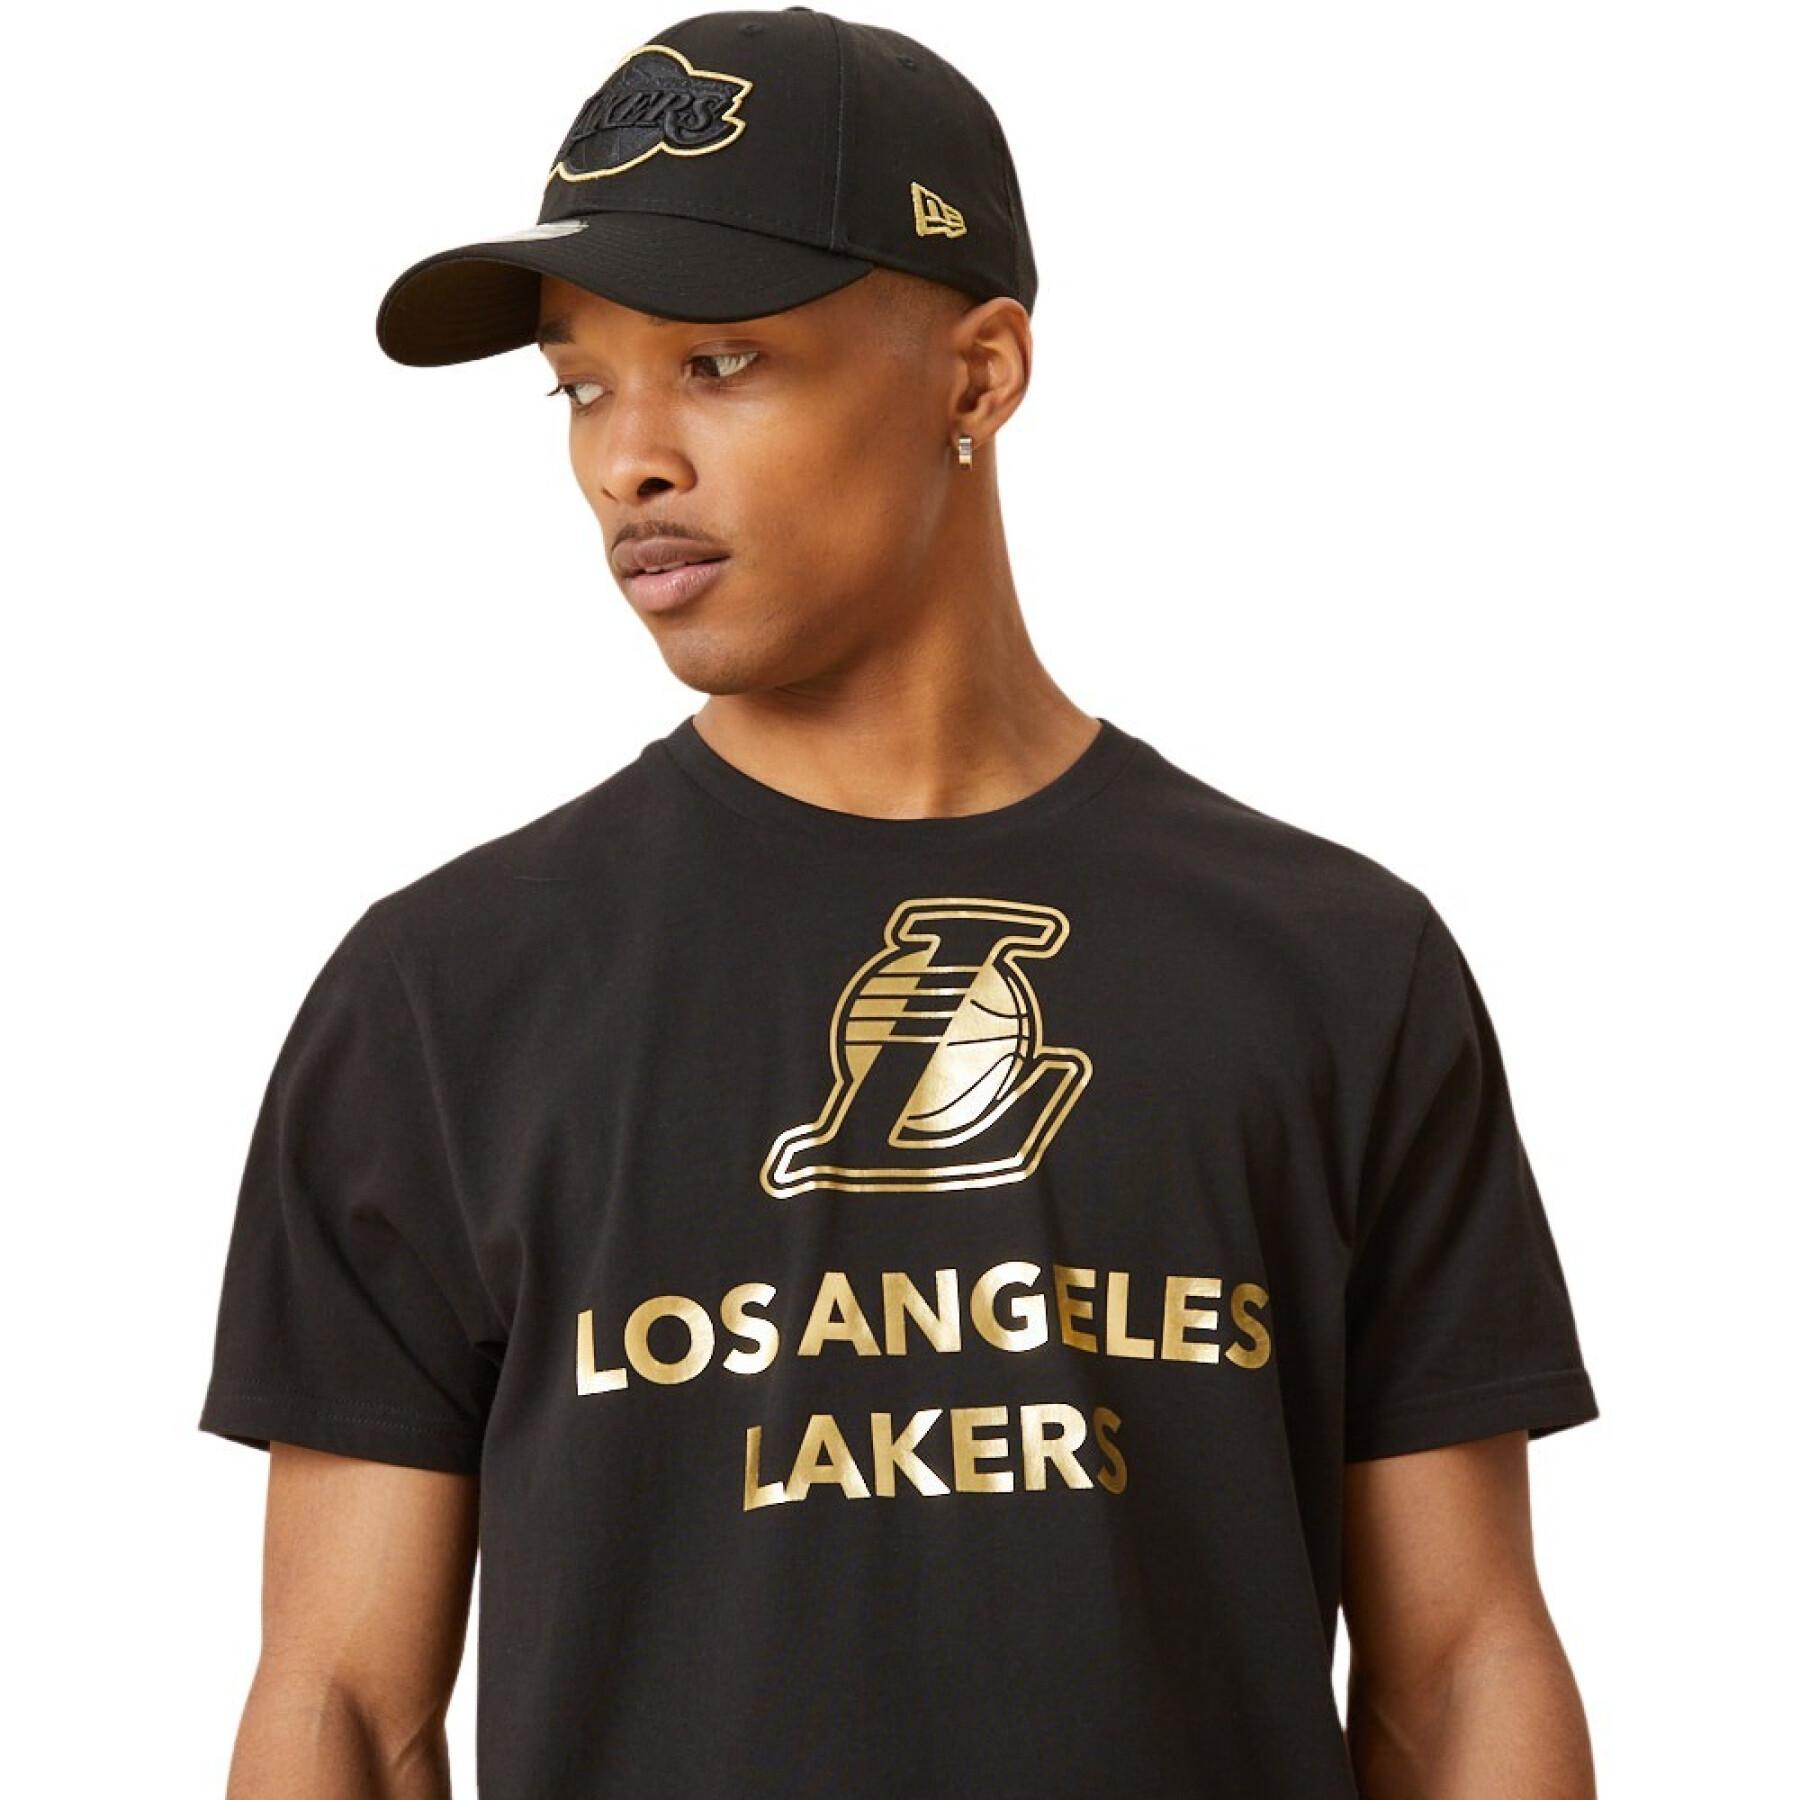 T-Shirt Los Angeles Lakers Black And Gold